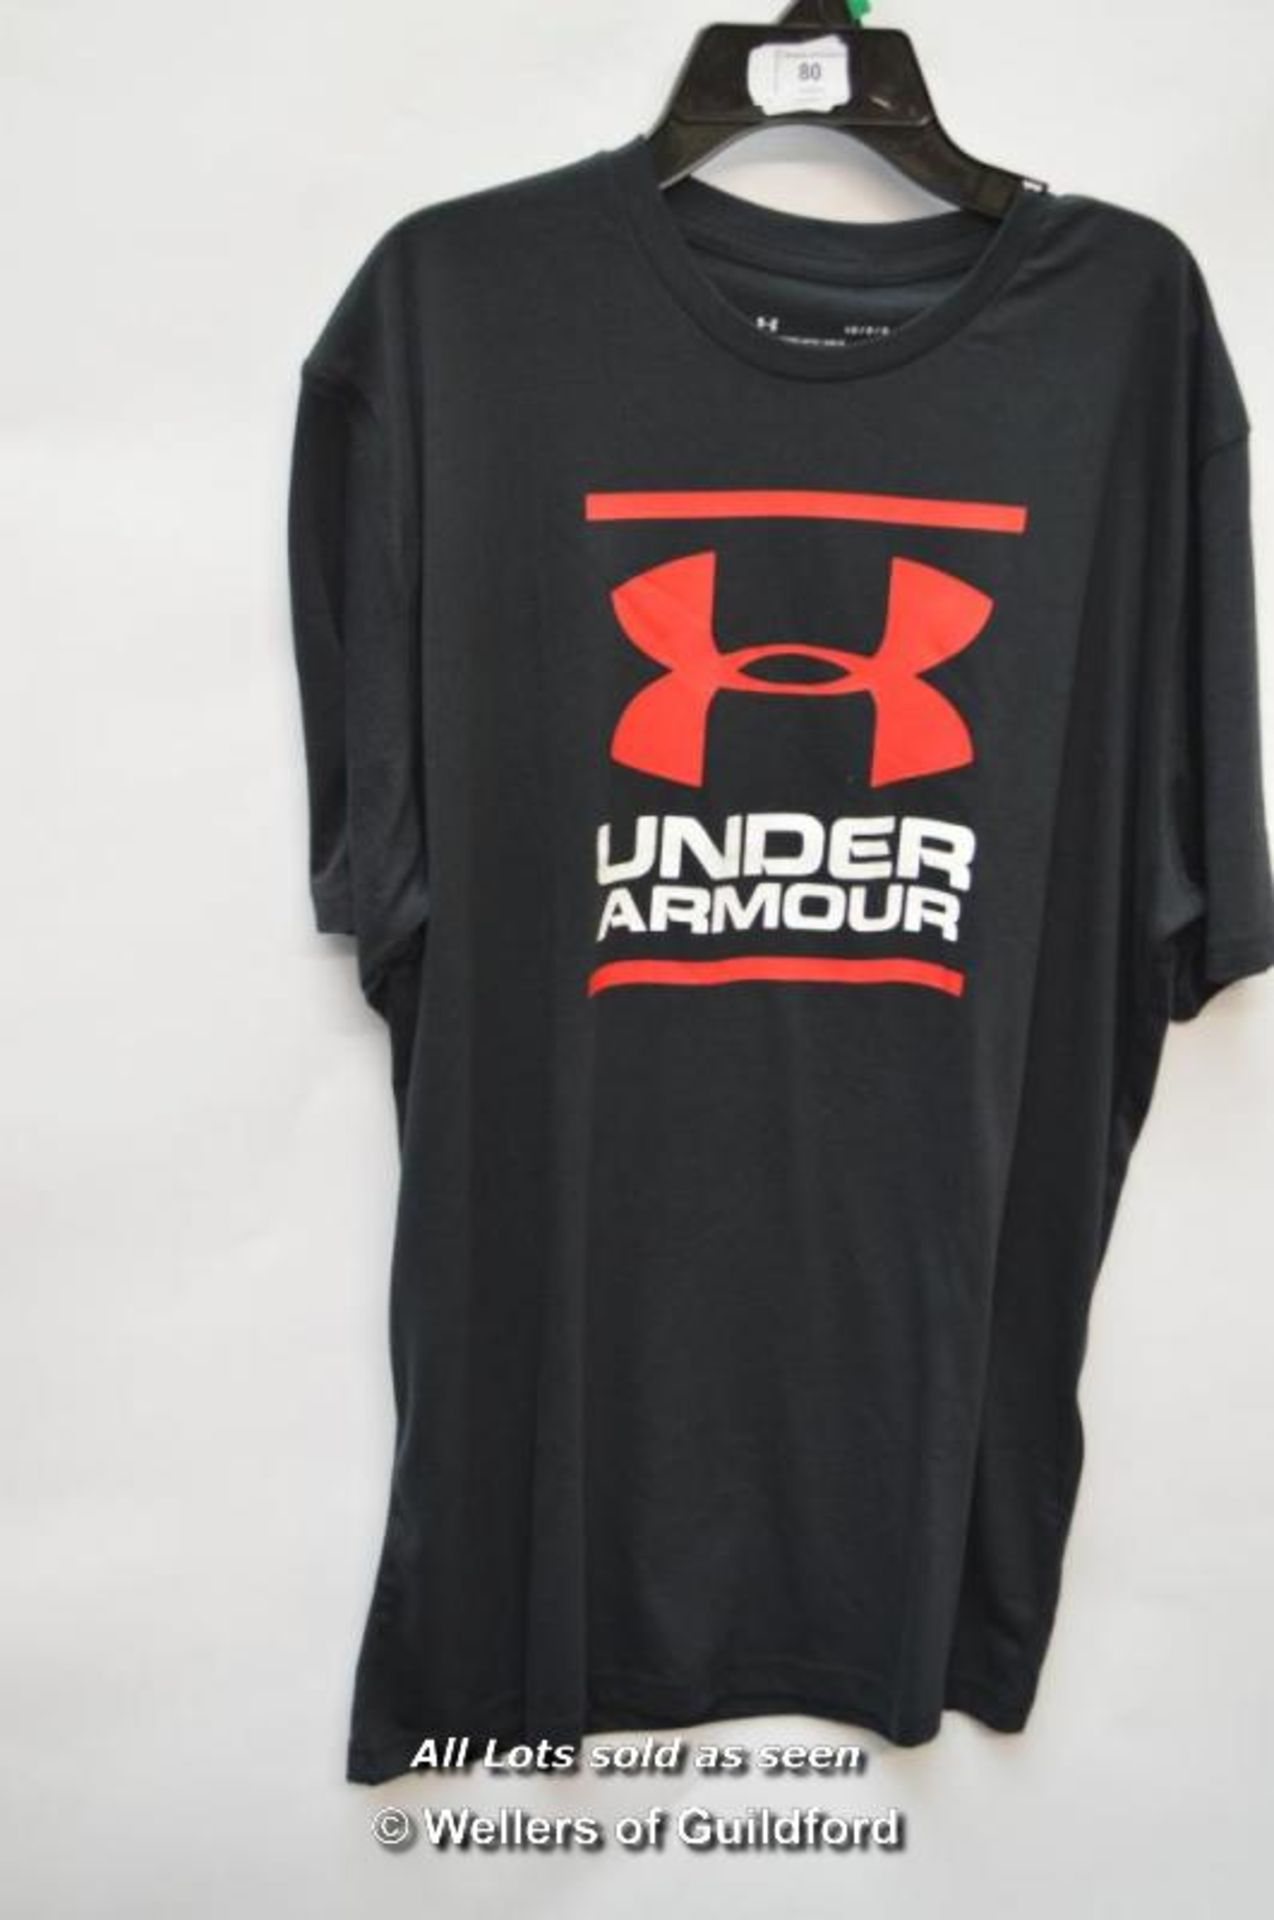 *GENTS NEW UNDER ARMOUR BLACK CREW NECK T-SHIRT SIZE LARGE